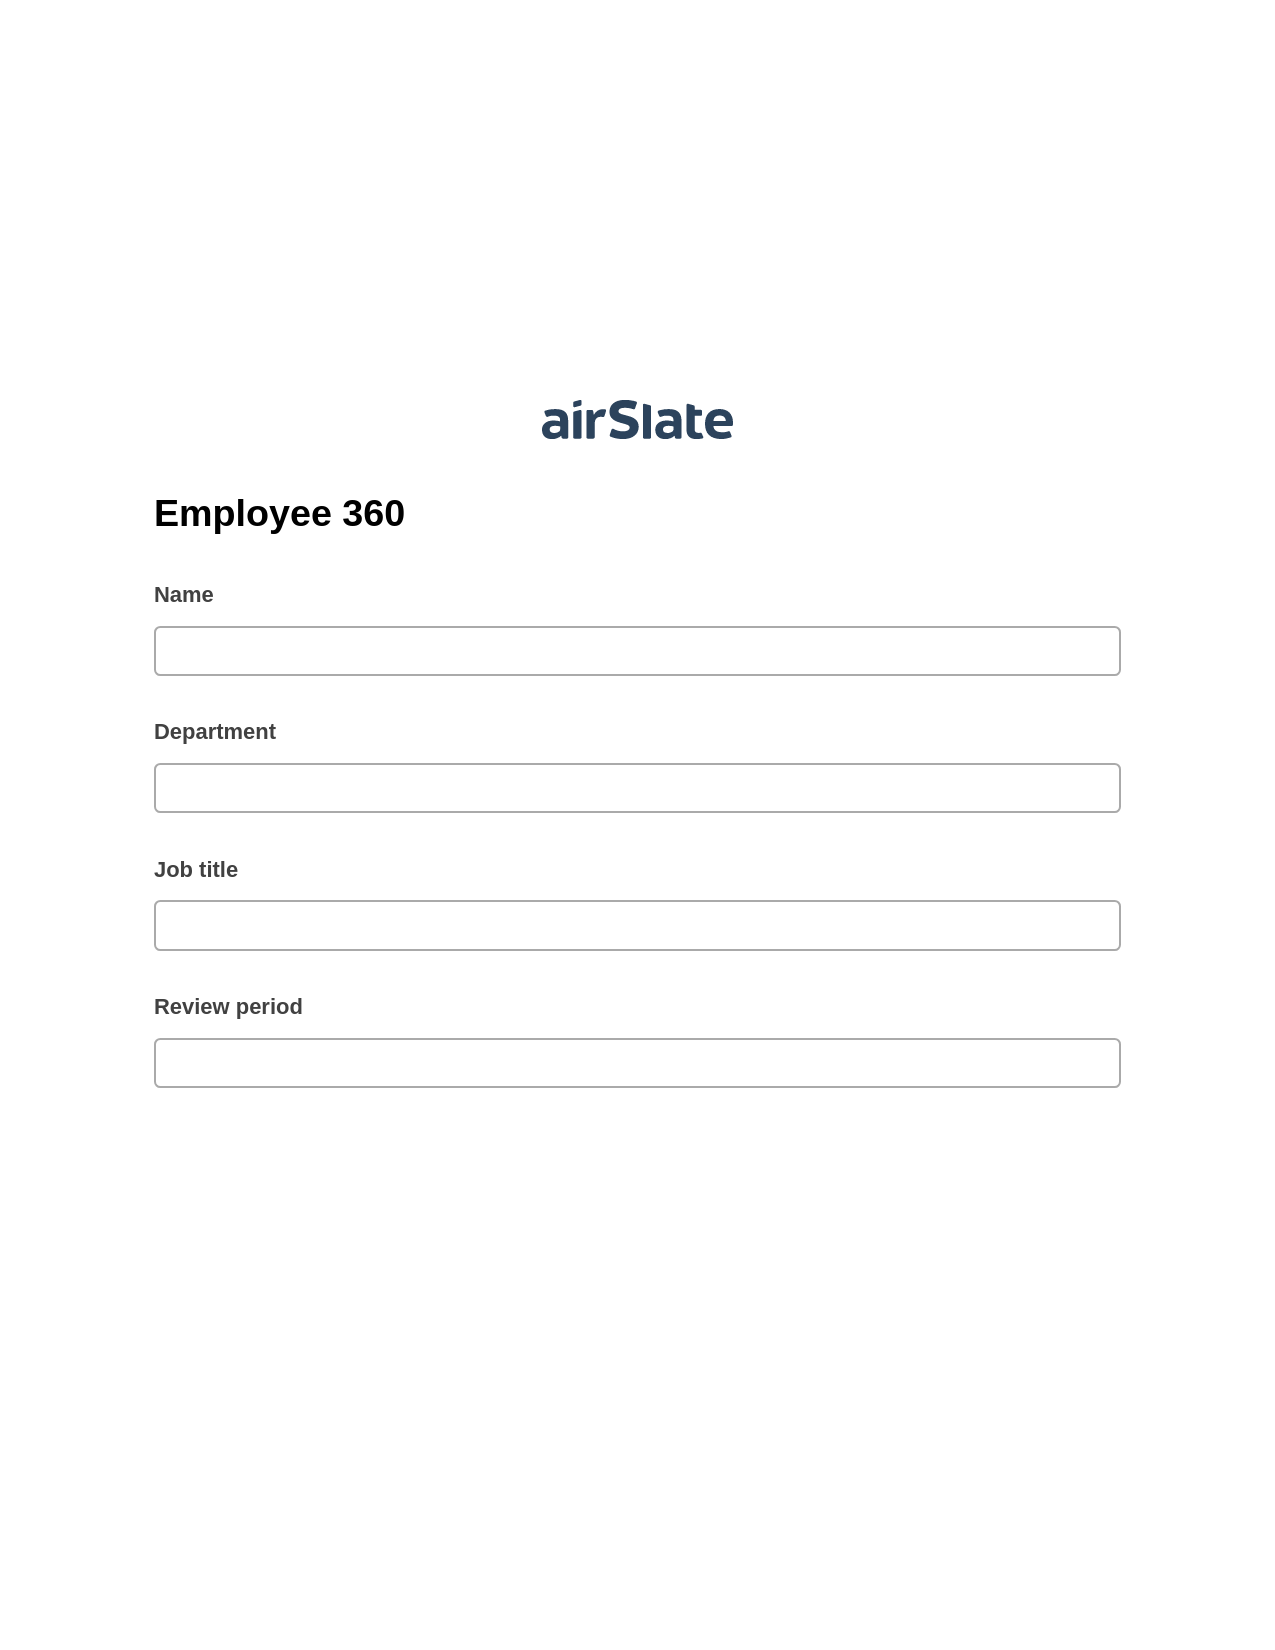 Employee 360 Pre-fill from MS Dynamics 365 Records, Create MS Dynamics 365 Records Bot, Export to Smartsheet